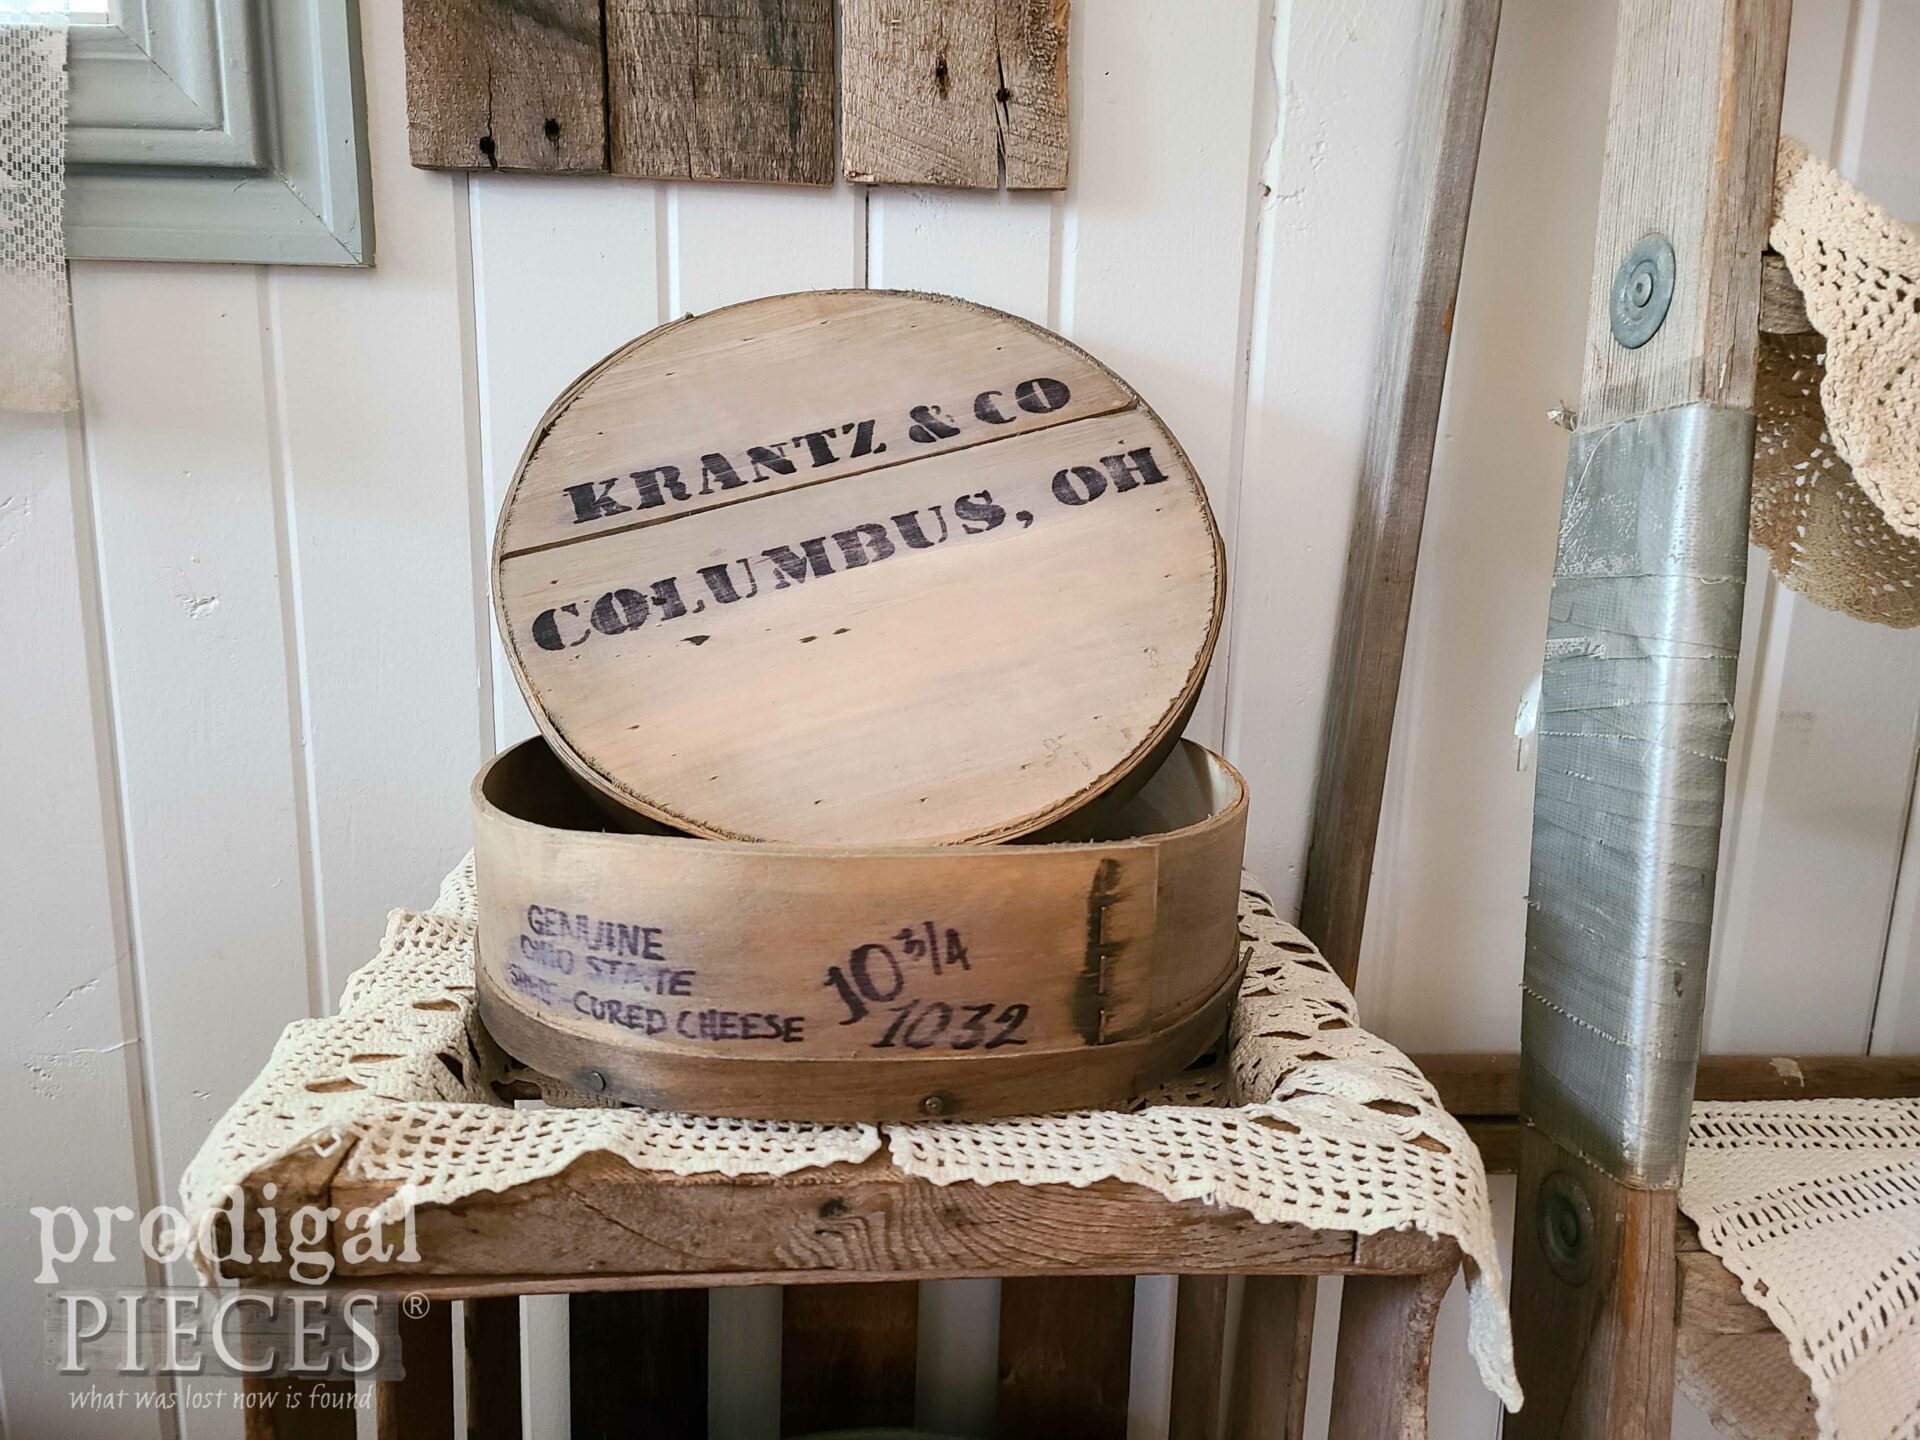 Stained and Stenciled DIY Antique Cheese Box by Larissa of Prodigal Pieces | prodigalpieces.com #prodigalpieces #cheese #diy #farmhouse